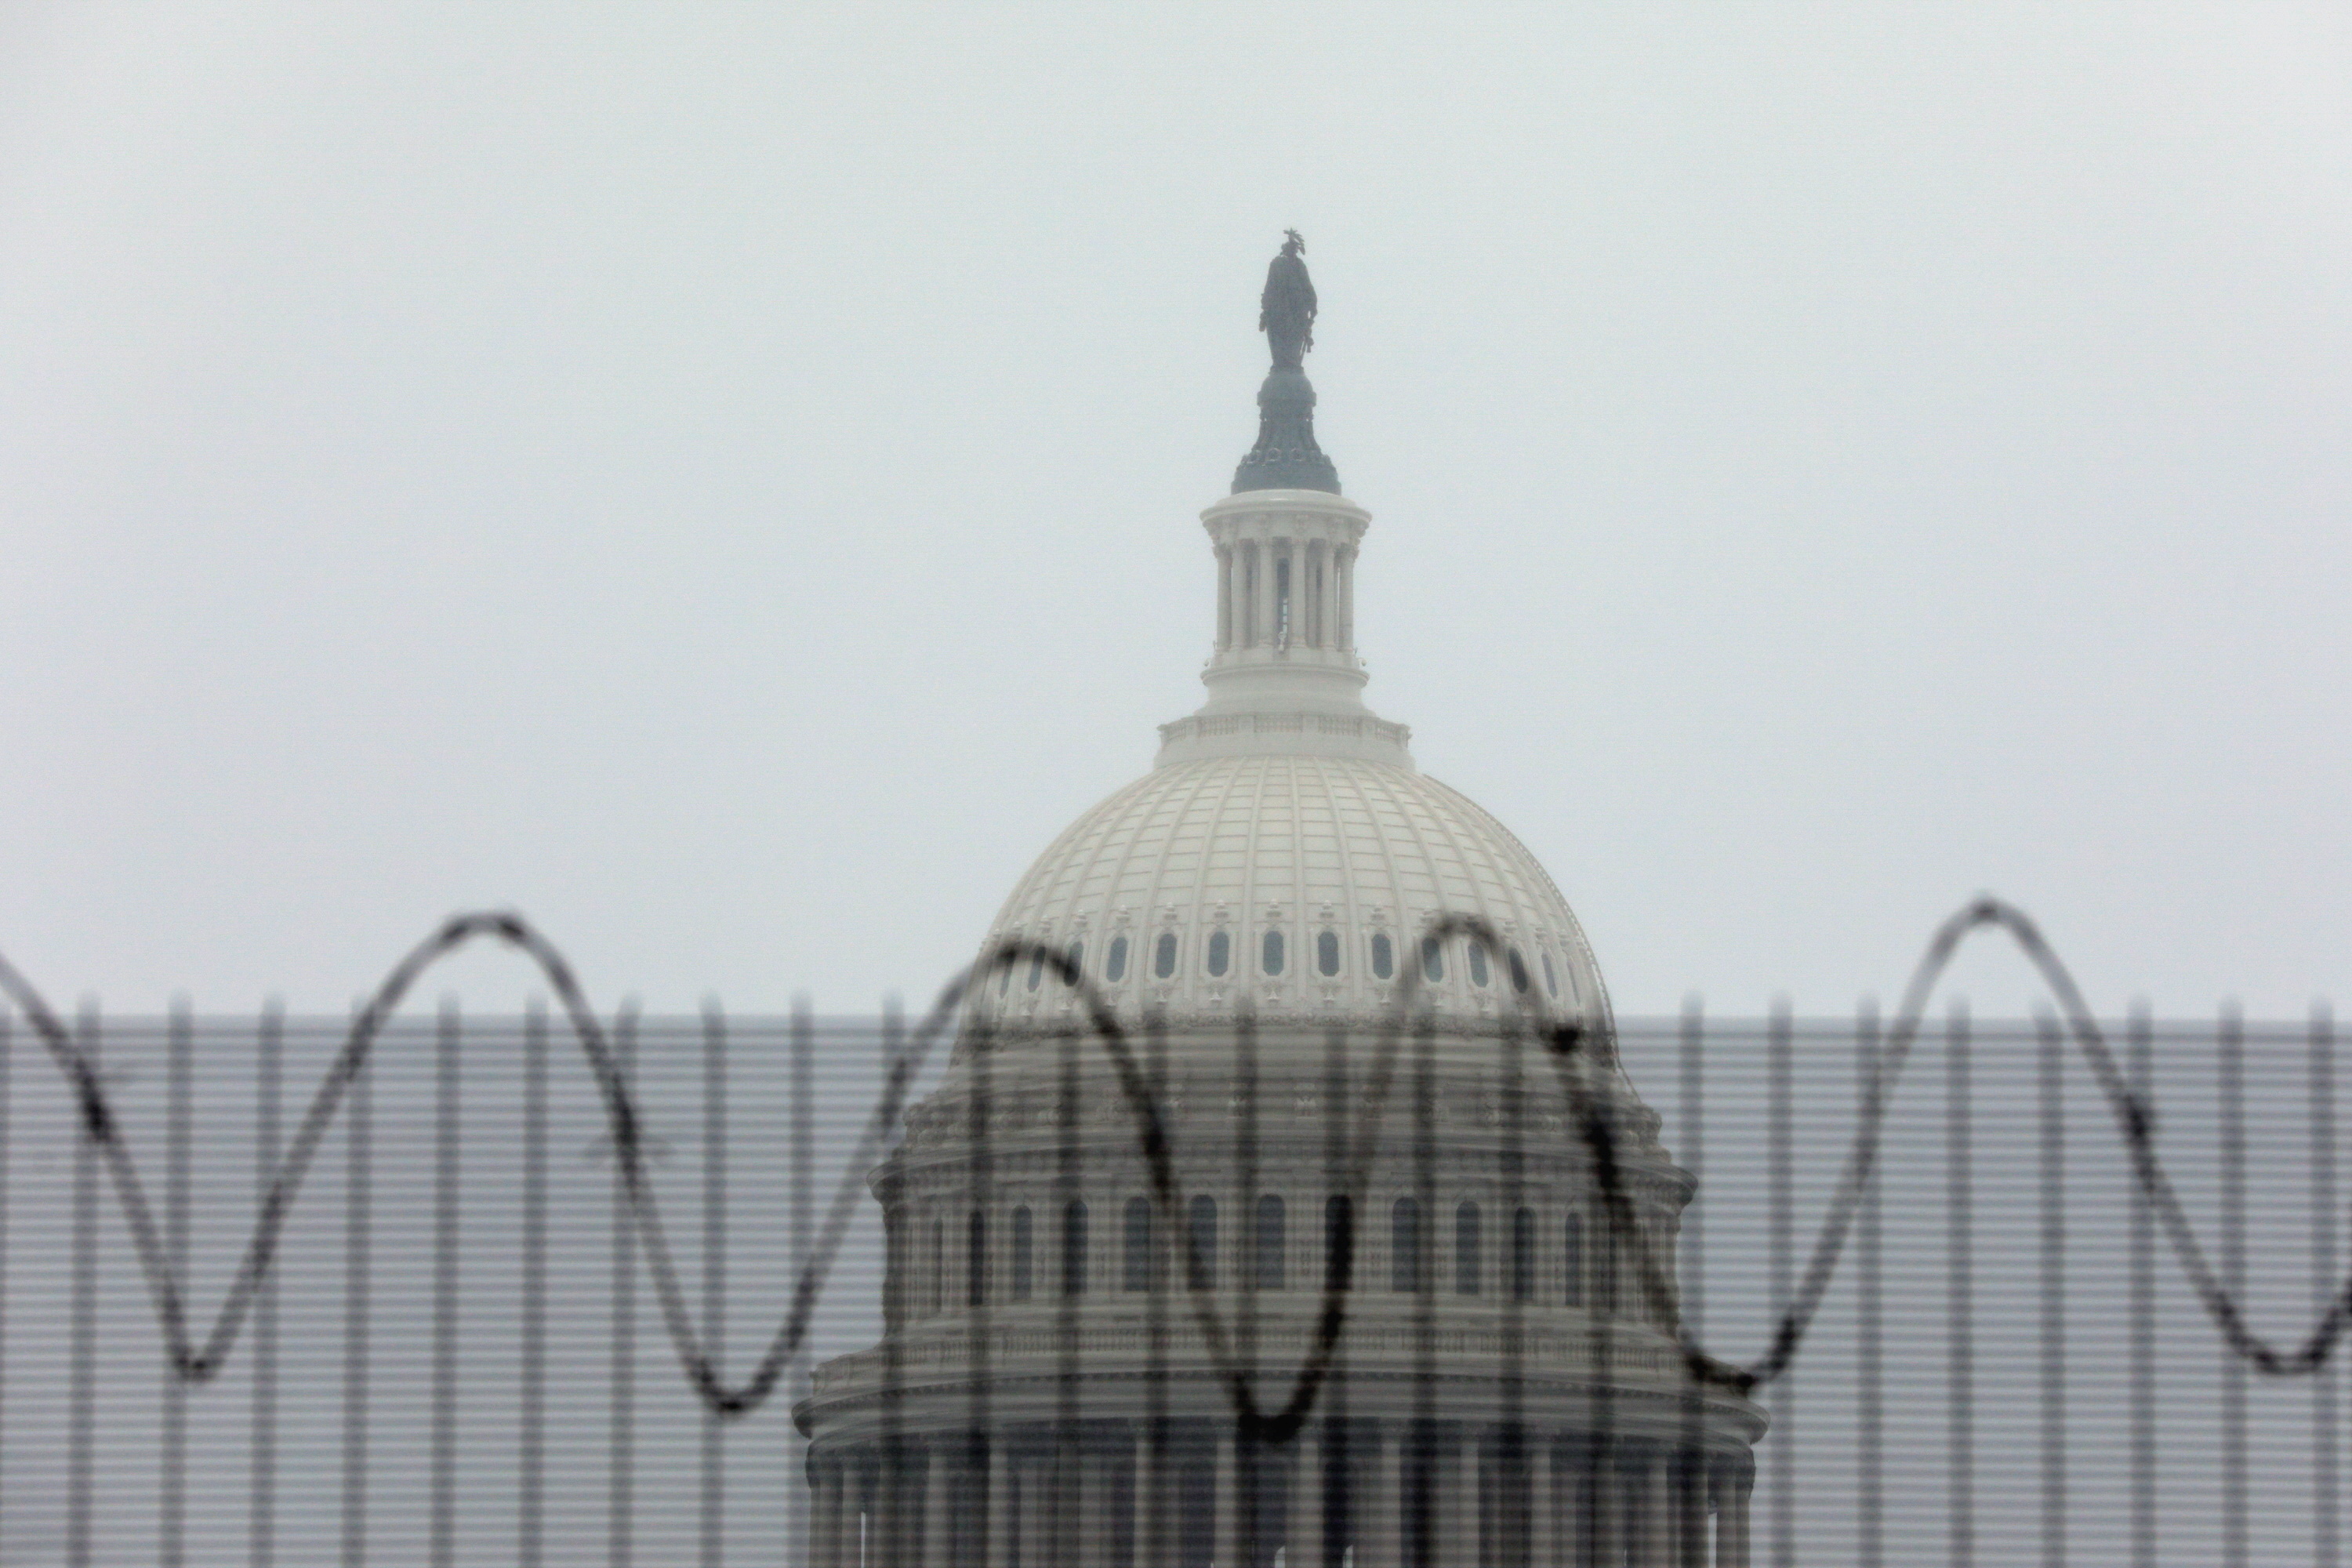 The U.S. Capitol dome is seen behind protective fencing as it snows in Washington